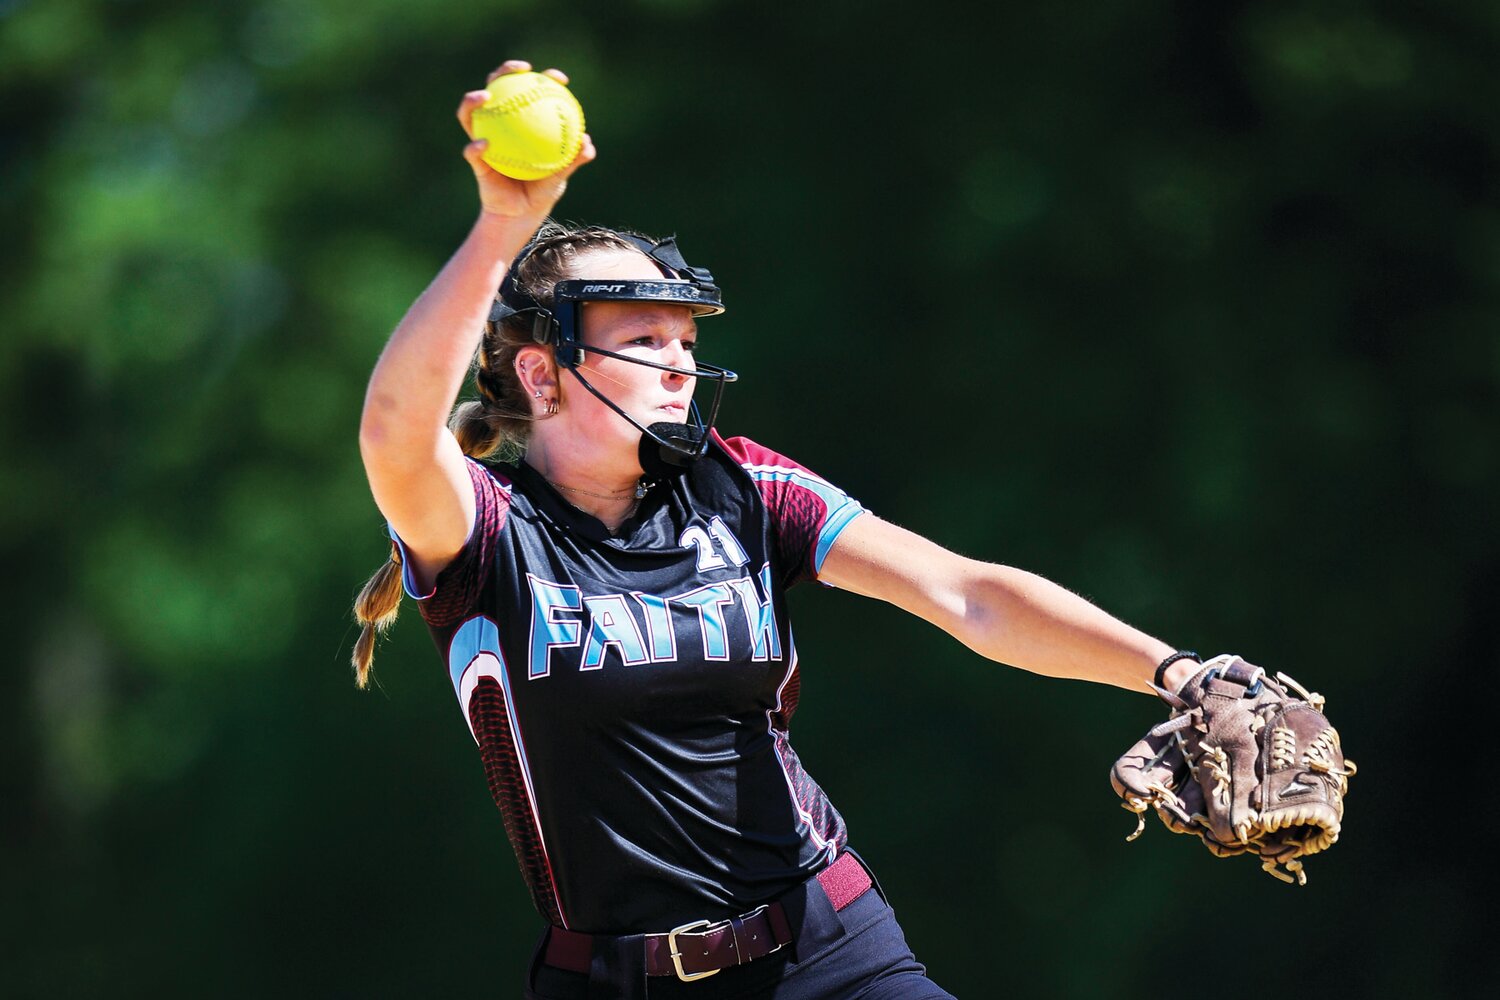 Kamryn Pepkowski pitches for Faith Christian during the district title game.